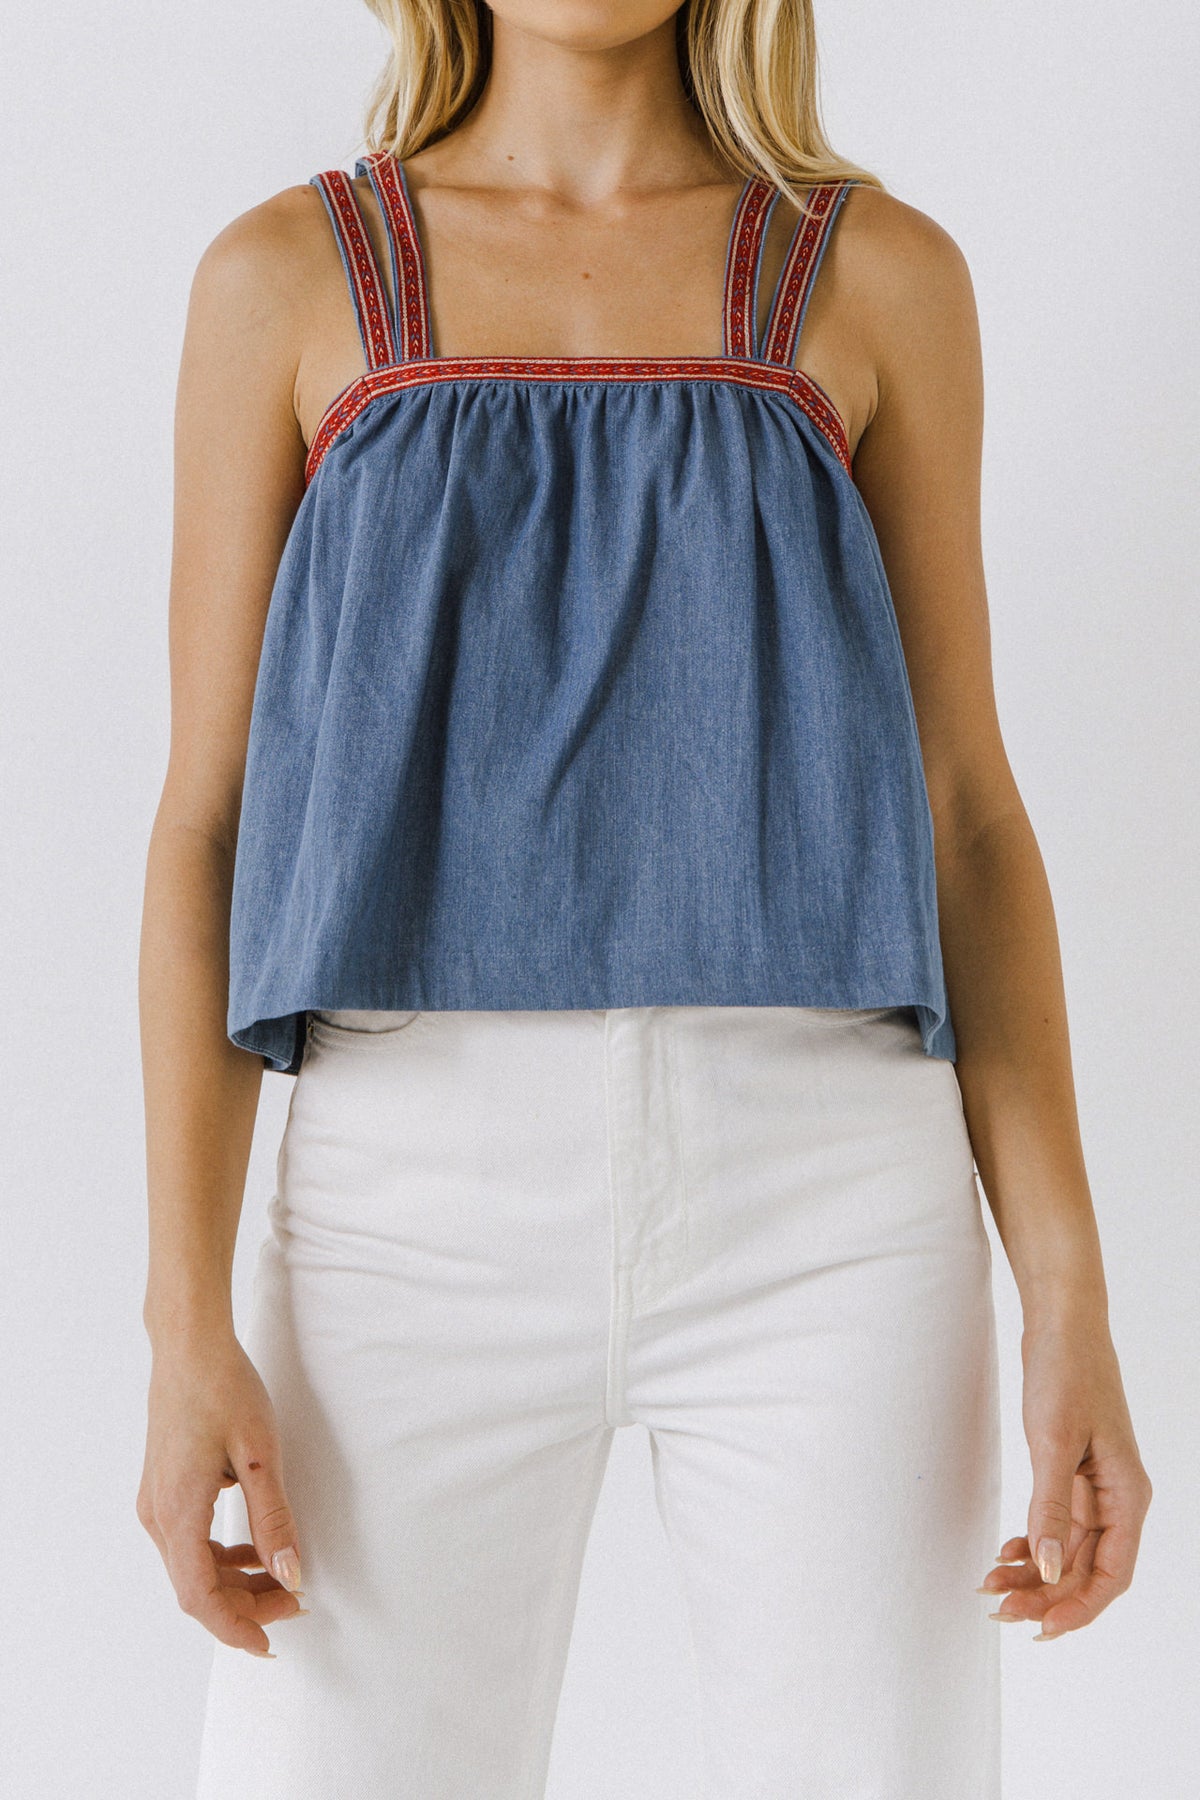 ENDLESS ROSE - Embroidery Detailed Denim Top - CAMI TOPS & TANK available at Objectrare